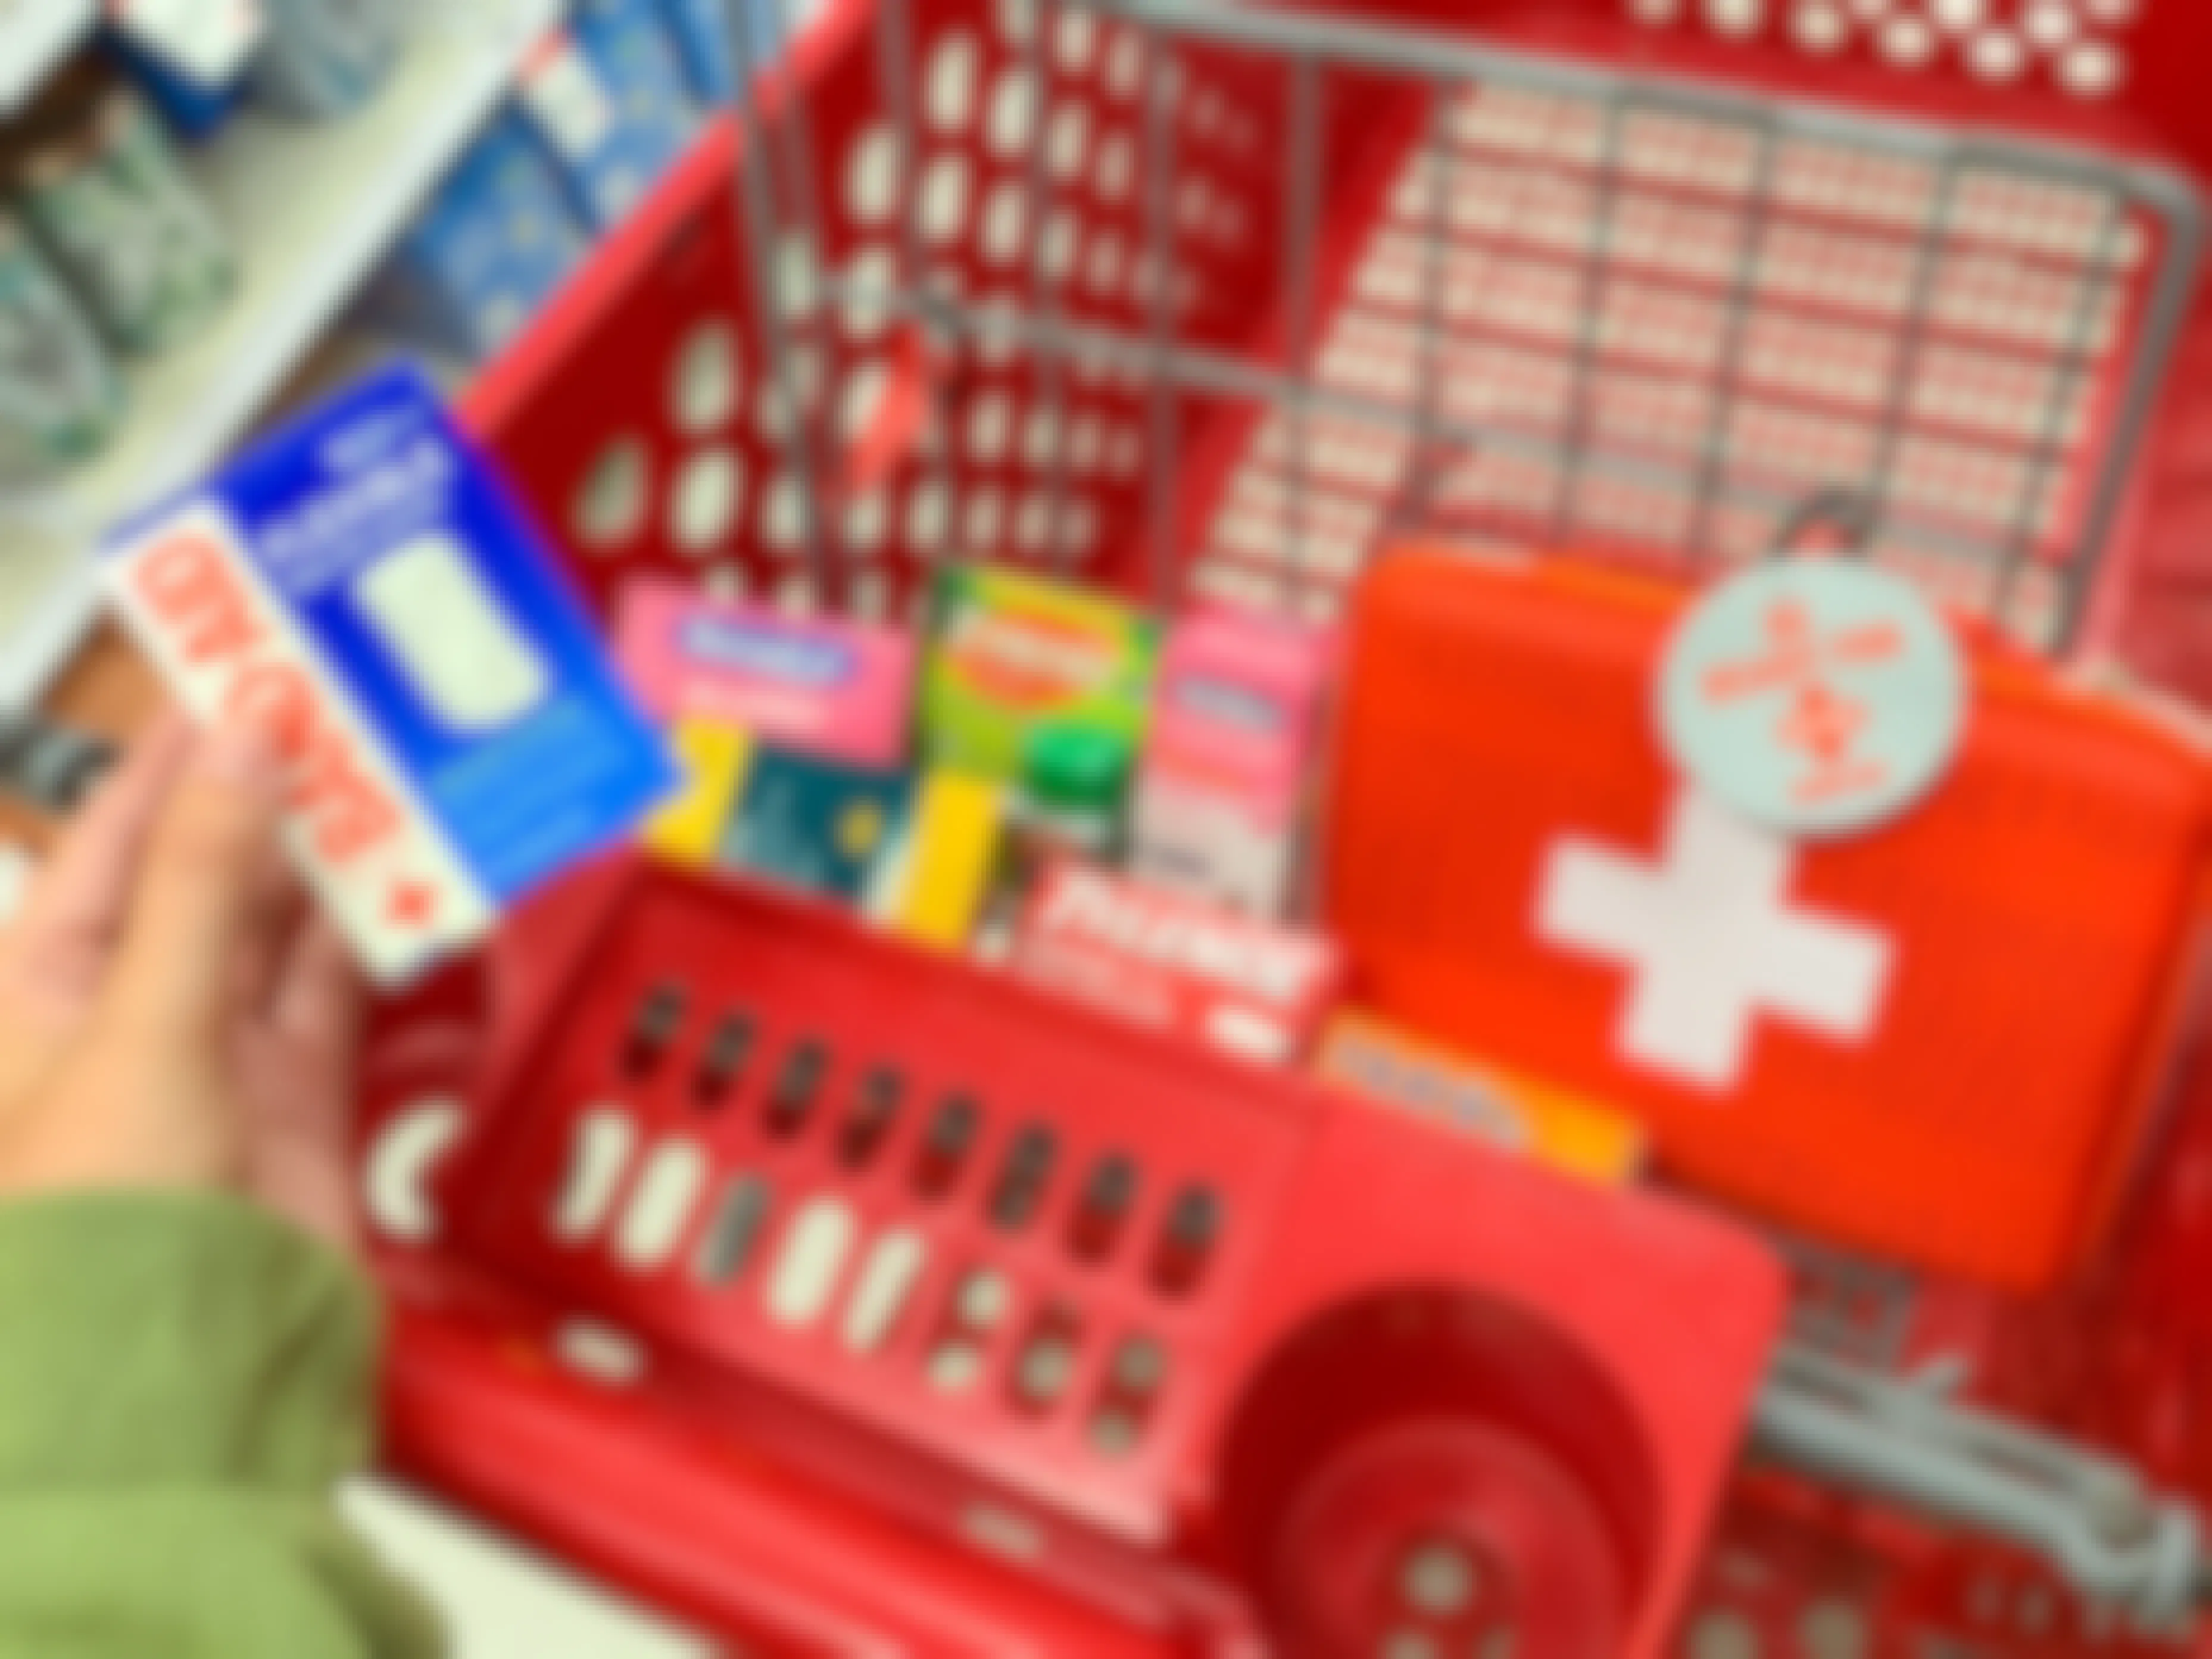 a person holding bandaids in front of a cart full of items from target